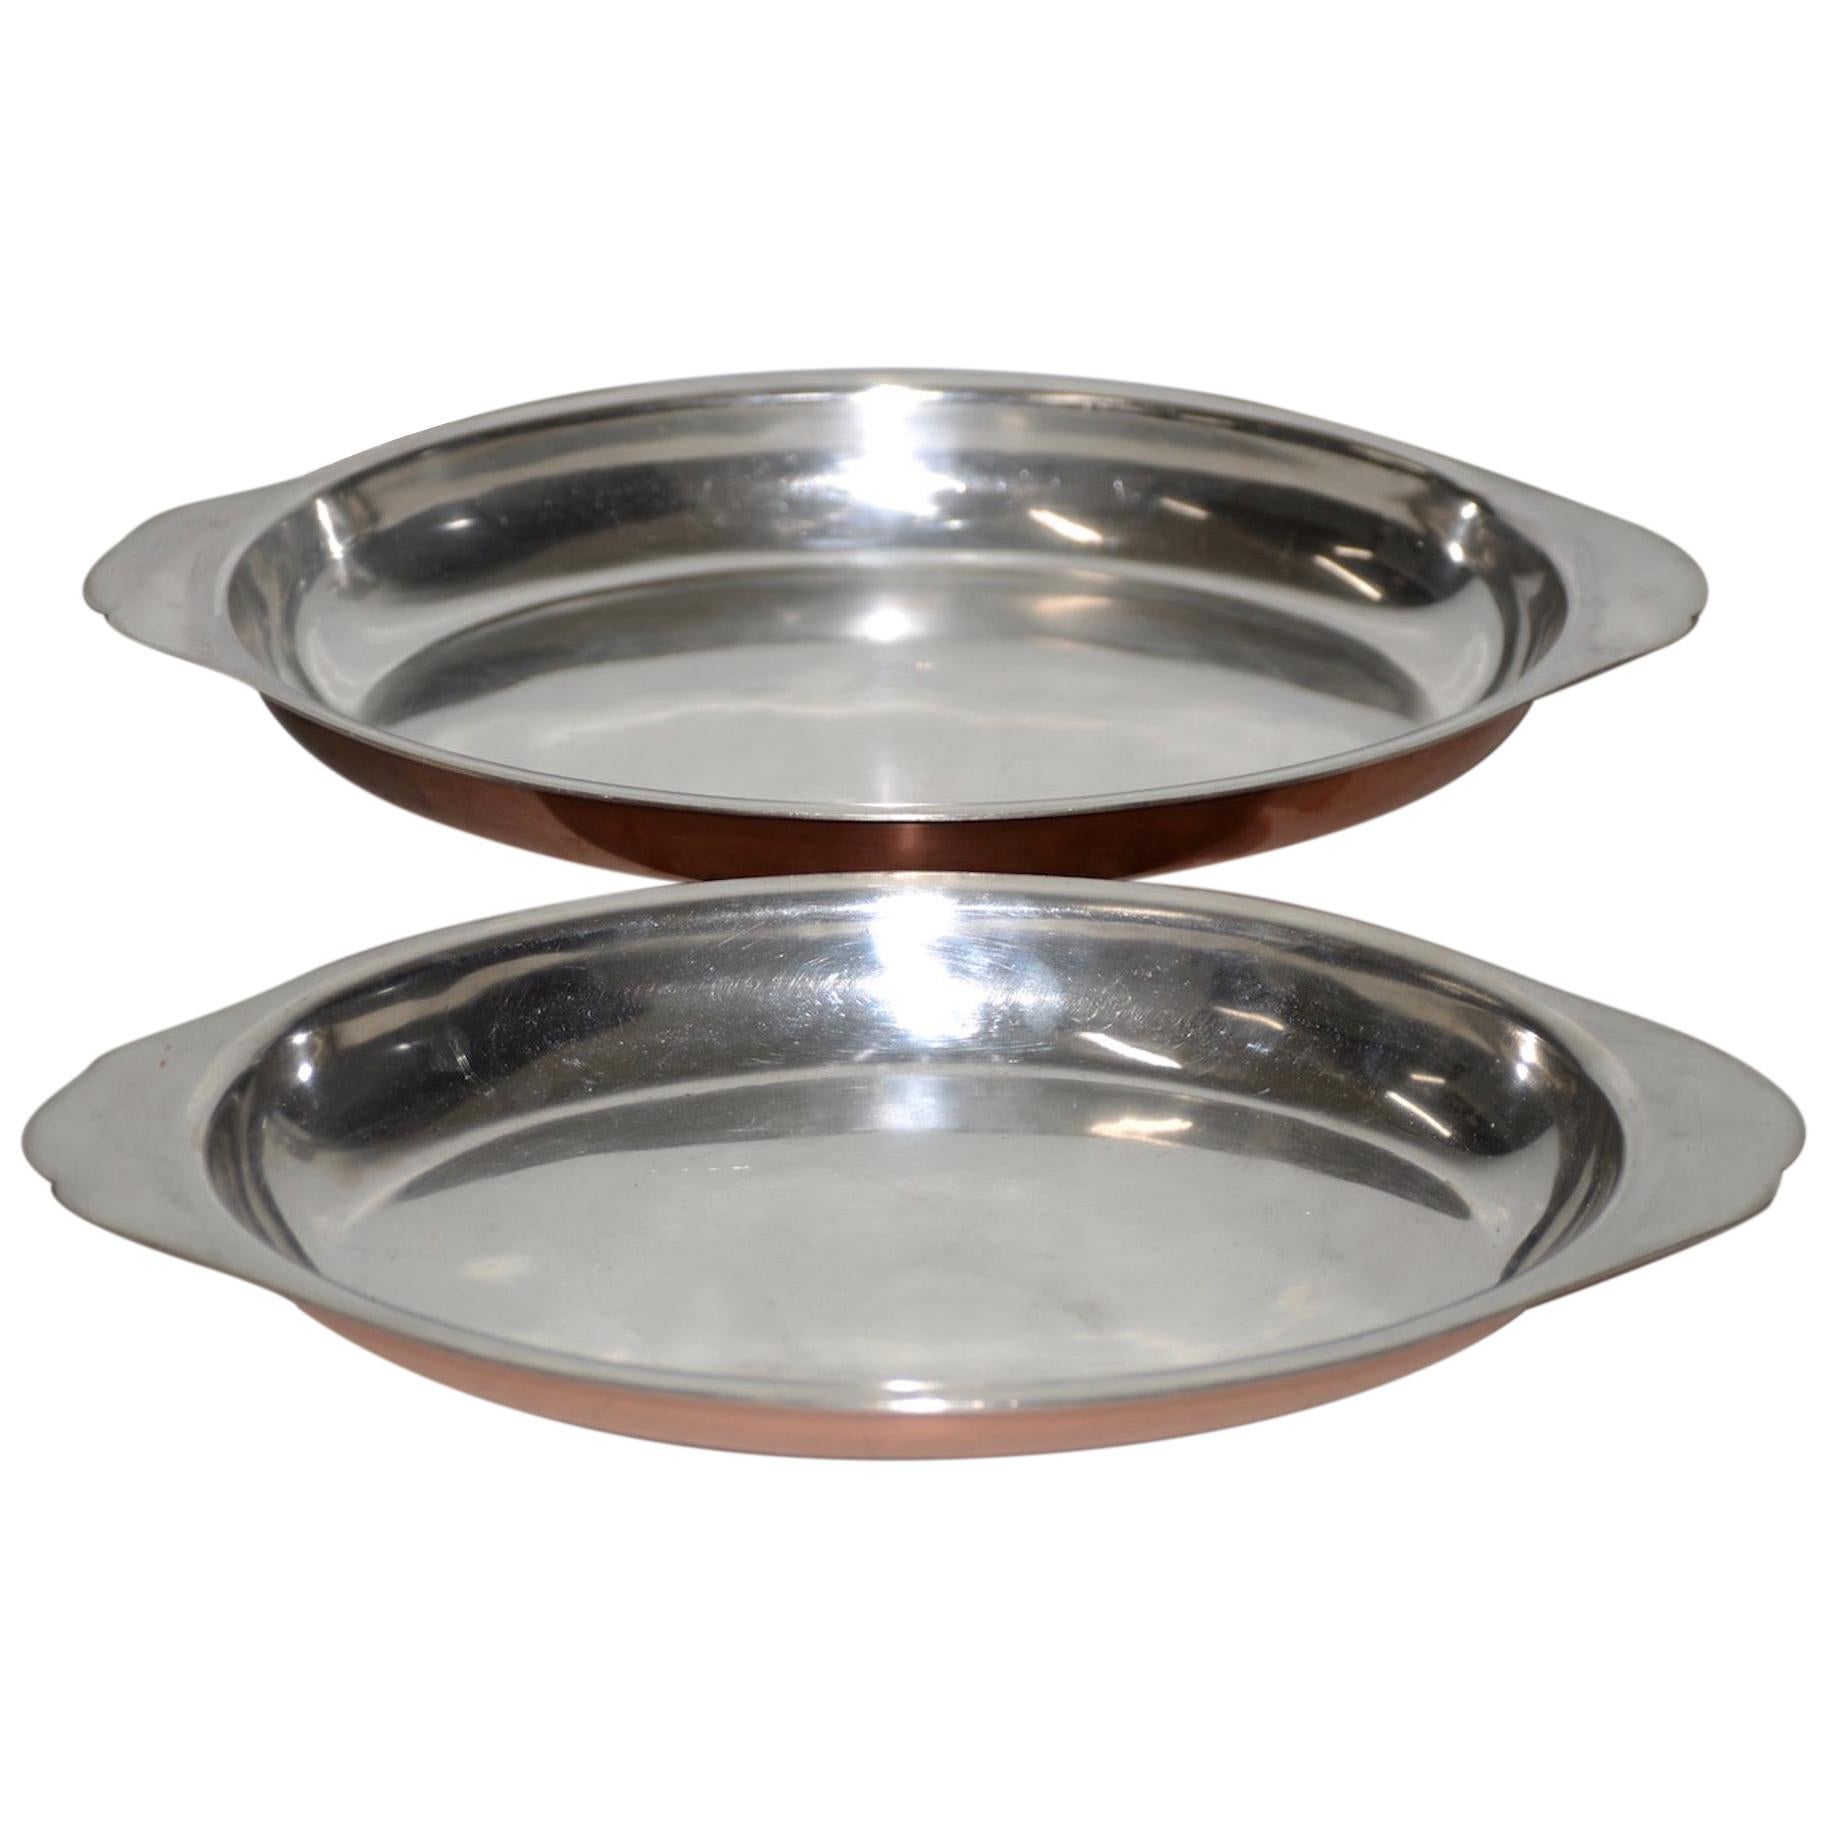 Joseph Heinrichs, New York. Pure Copper and Sterling Silver Platters For Sale